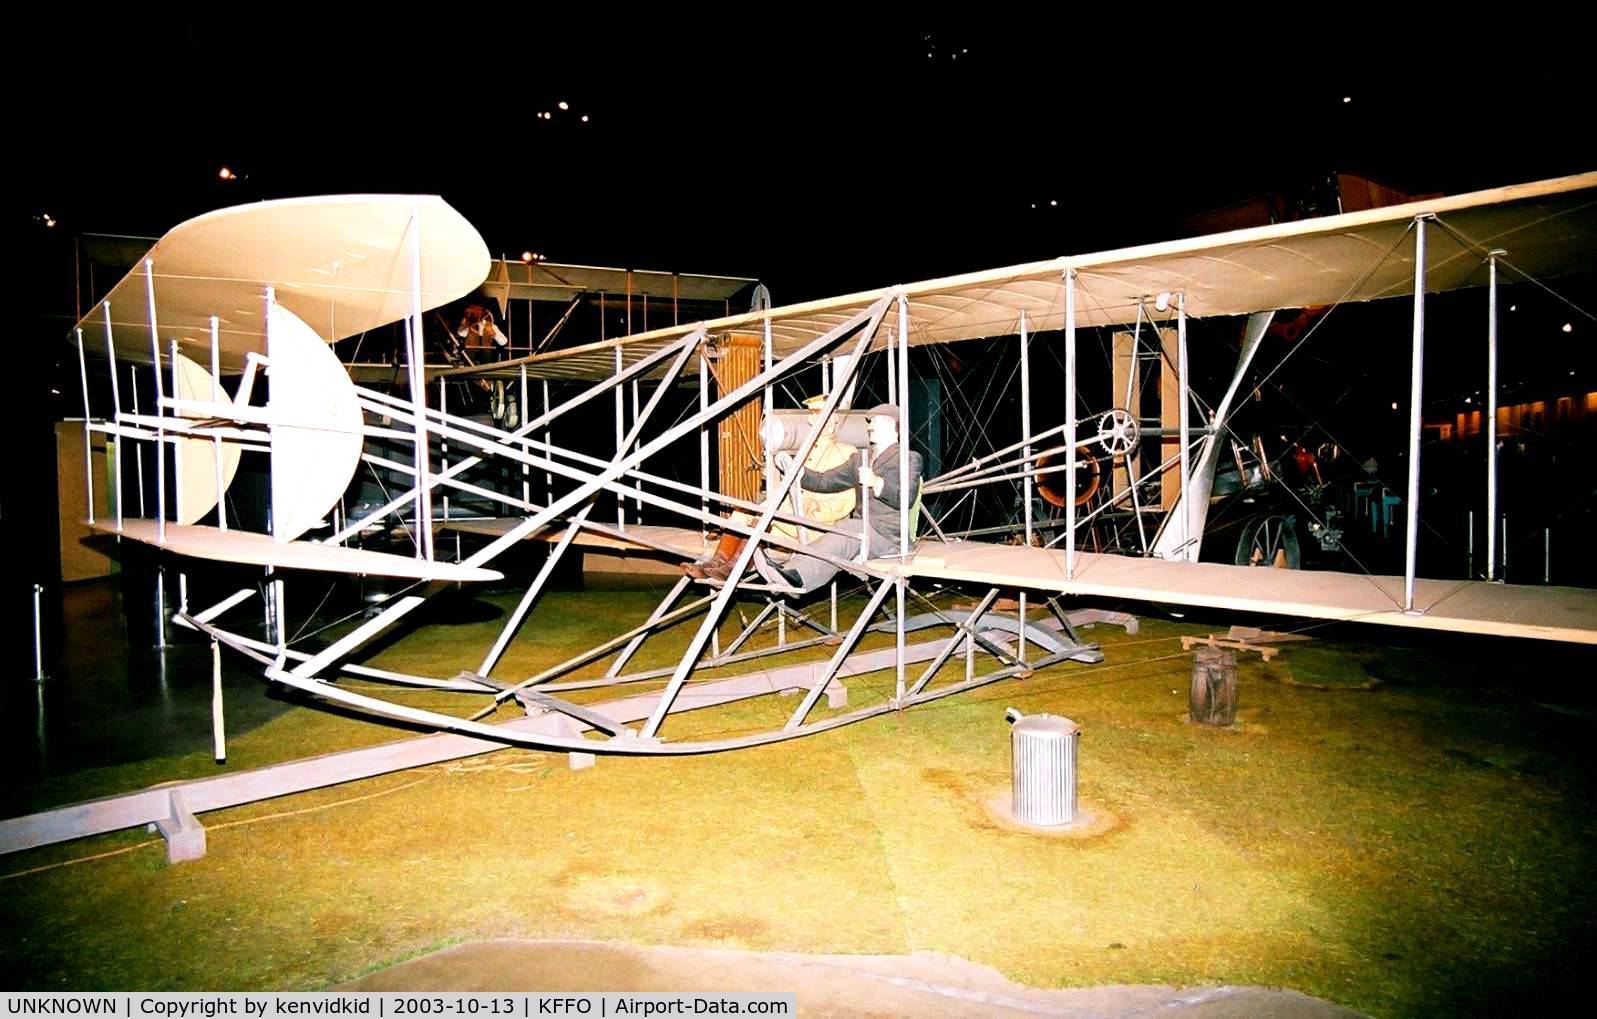 UNKNOWN, Wright Model B Flyer C/N unknown, At the Museum of the United States Air Force Dayton Ohio.